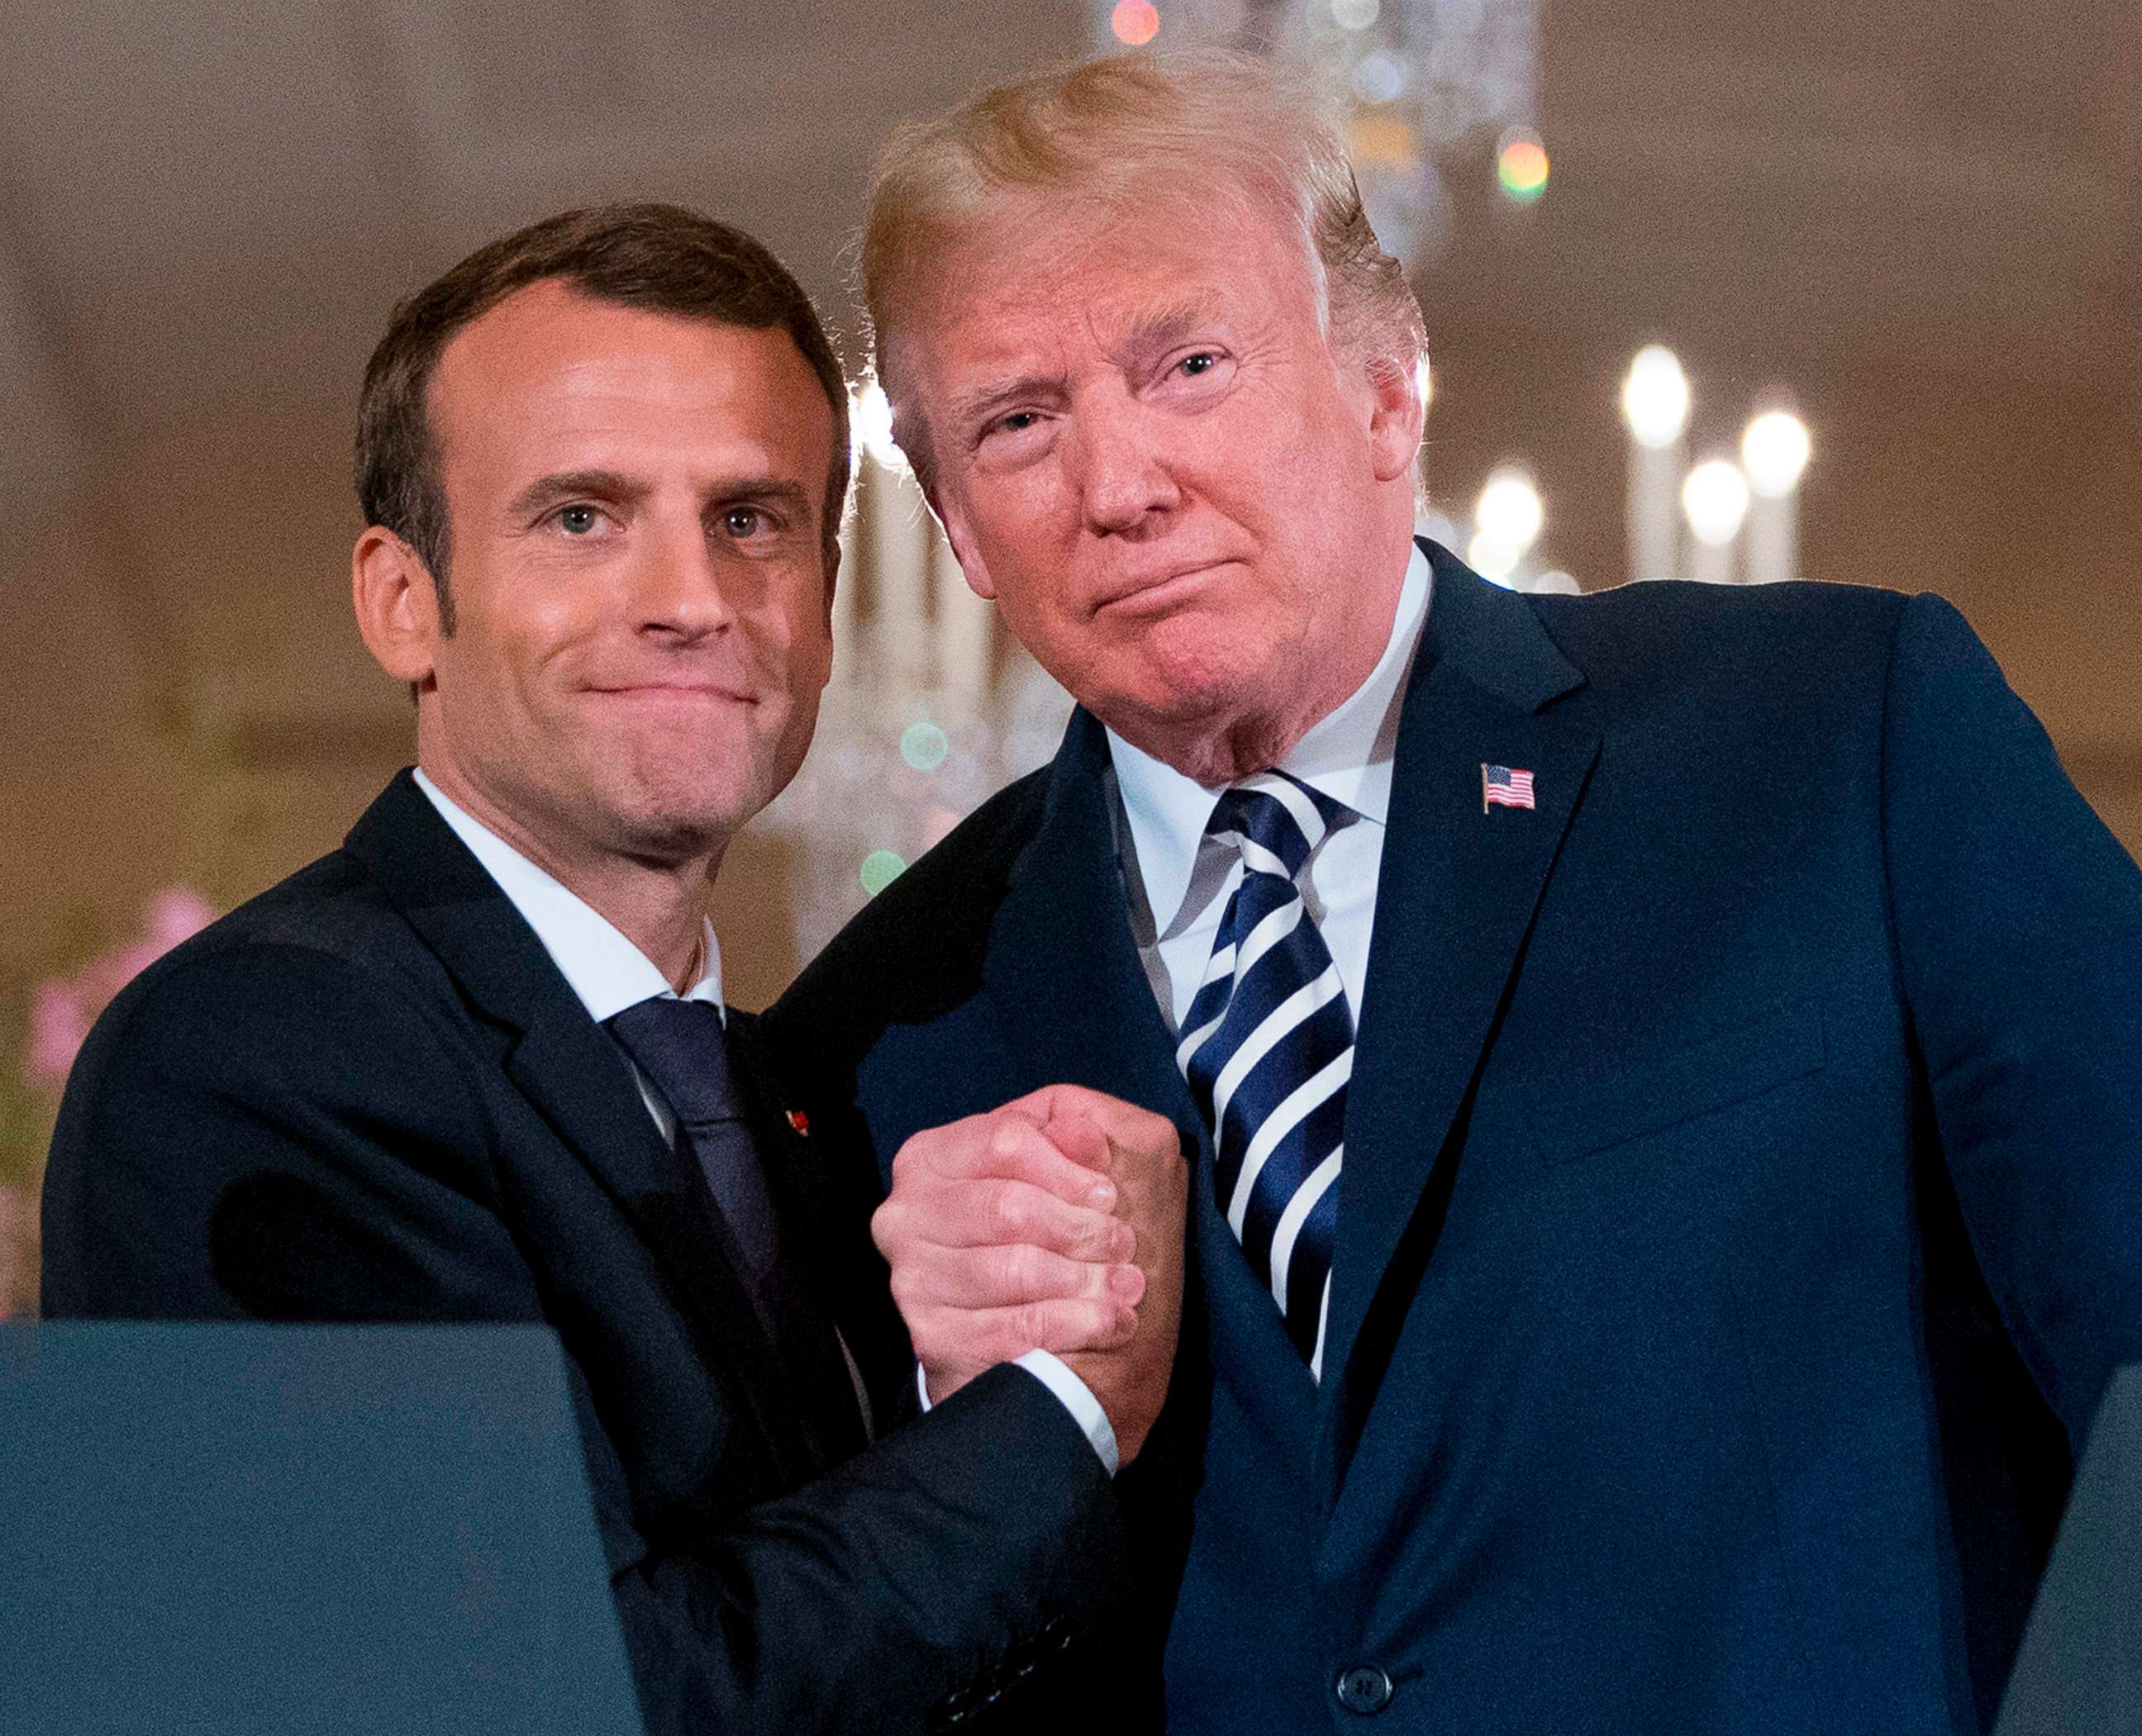 PHOTO: President Donald Trump and French President Emmanuel Macron embrace at the conclusion of a news conference in the East Room of the White House in Washington, April 24, 2018.